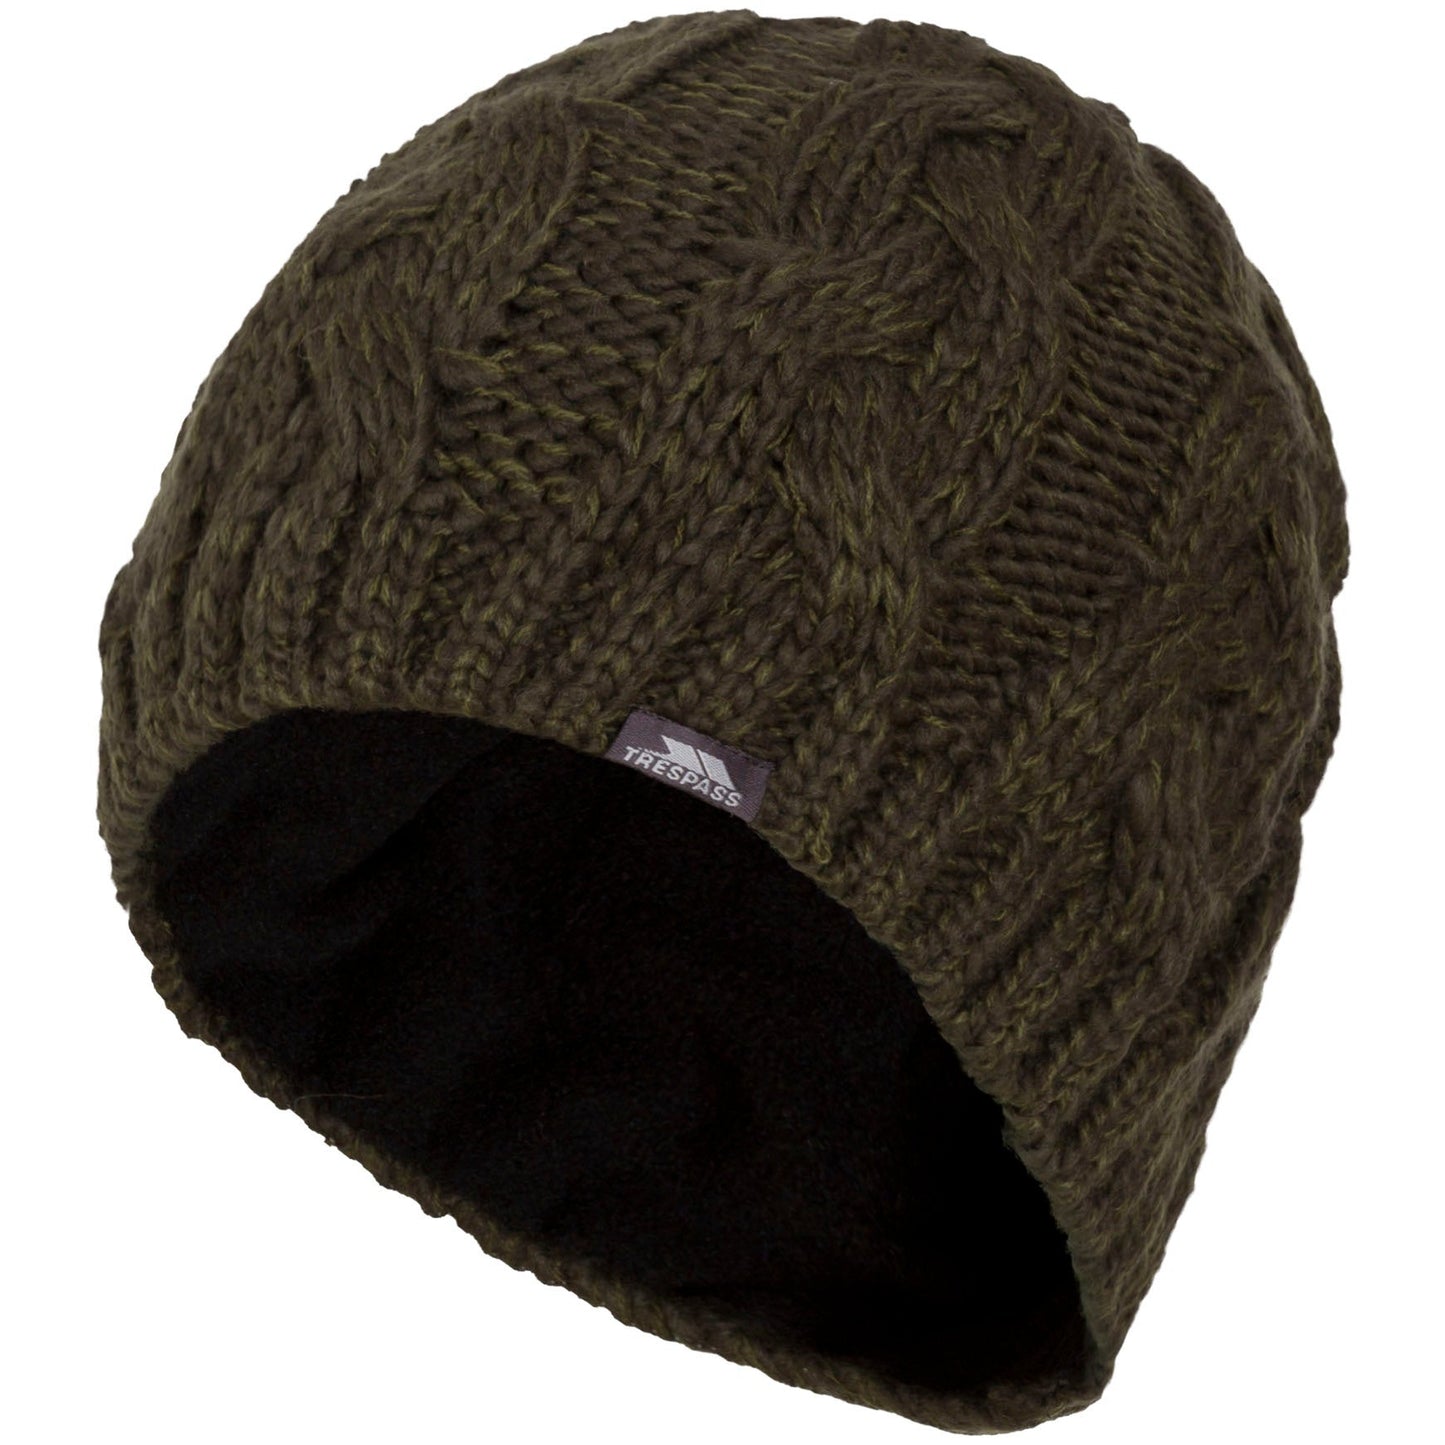 Tomlins Mens Knitted Beanie Hat - Olive